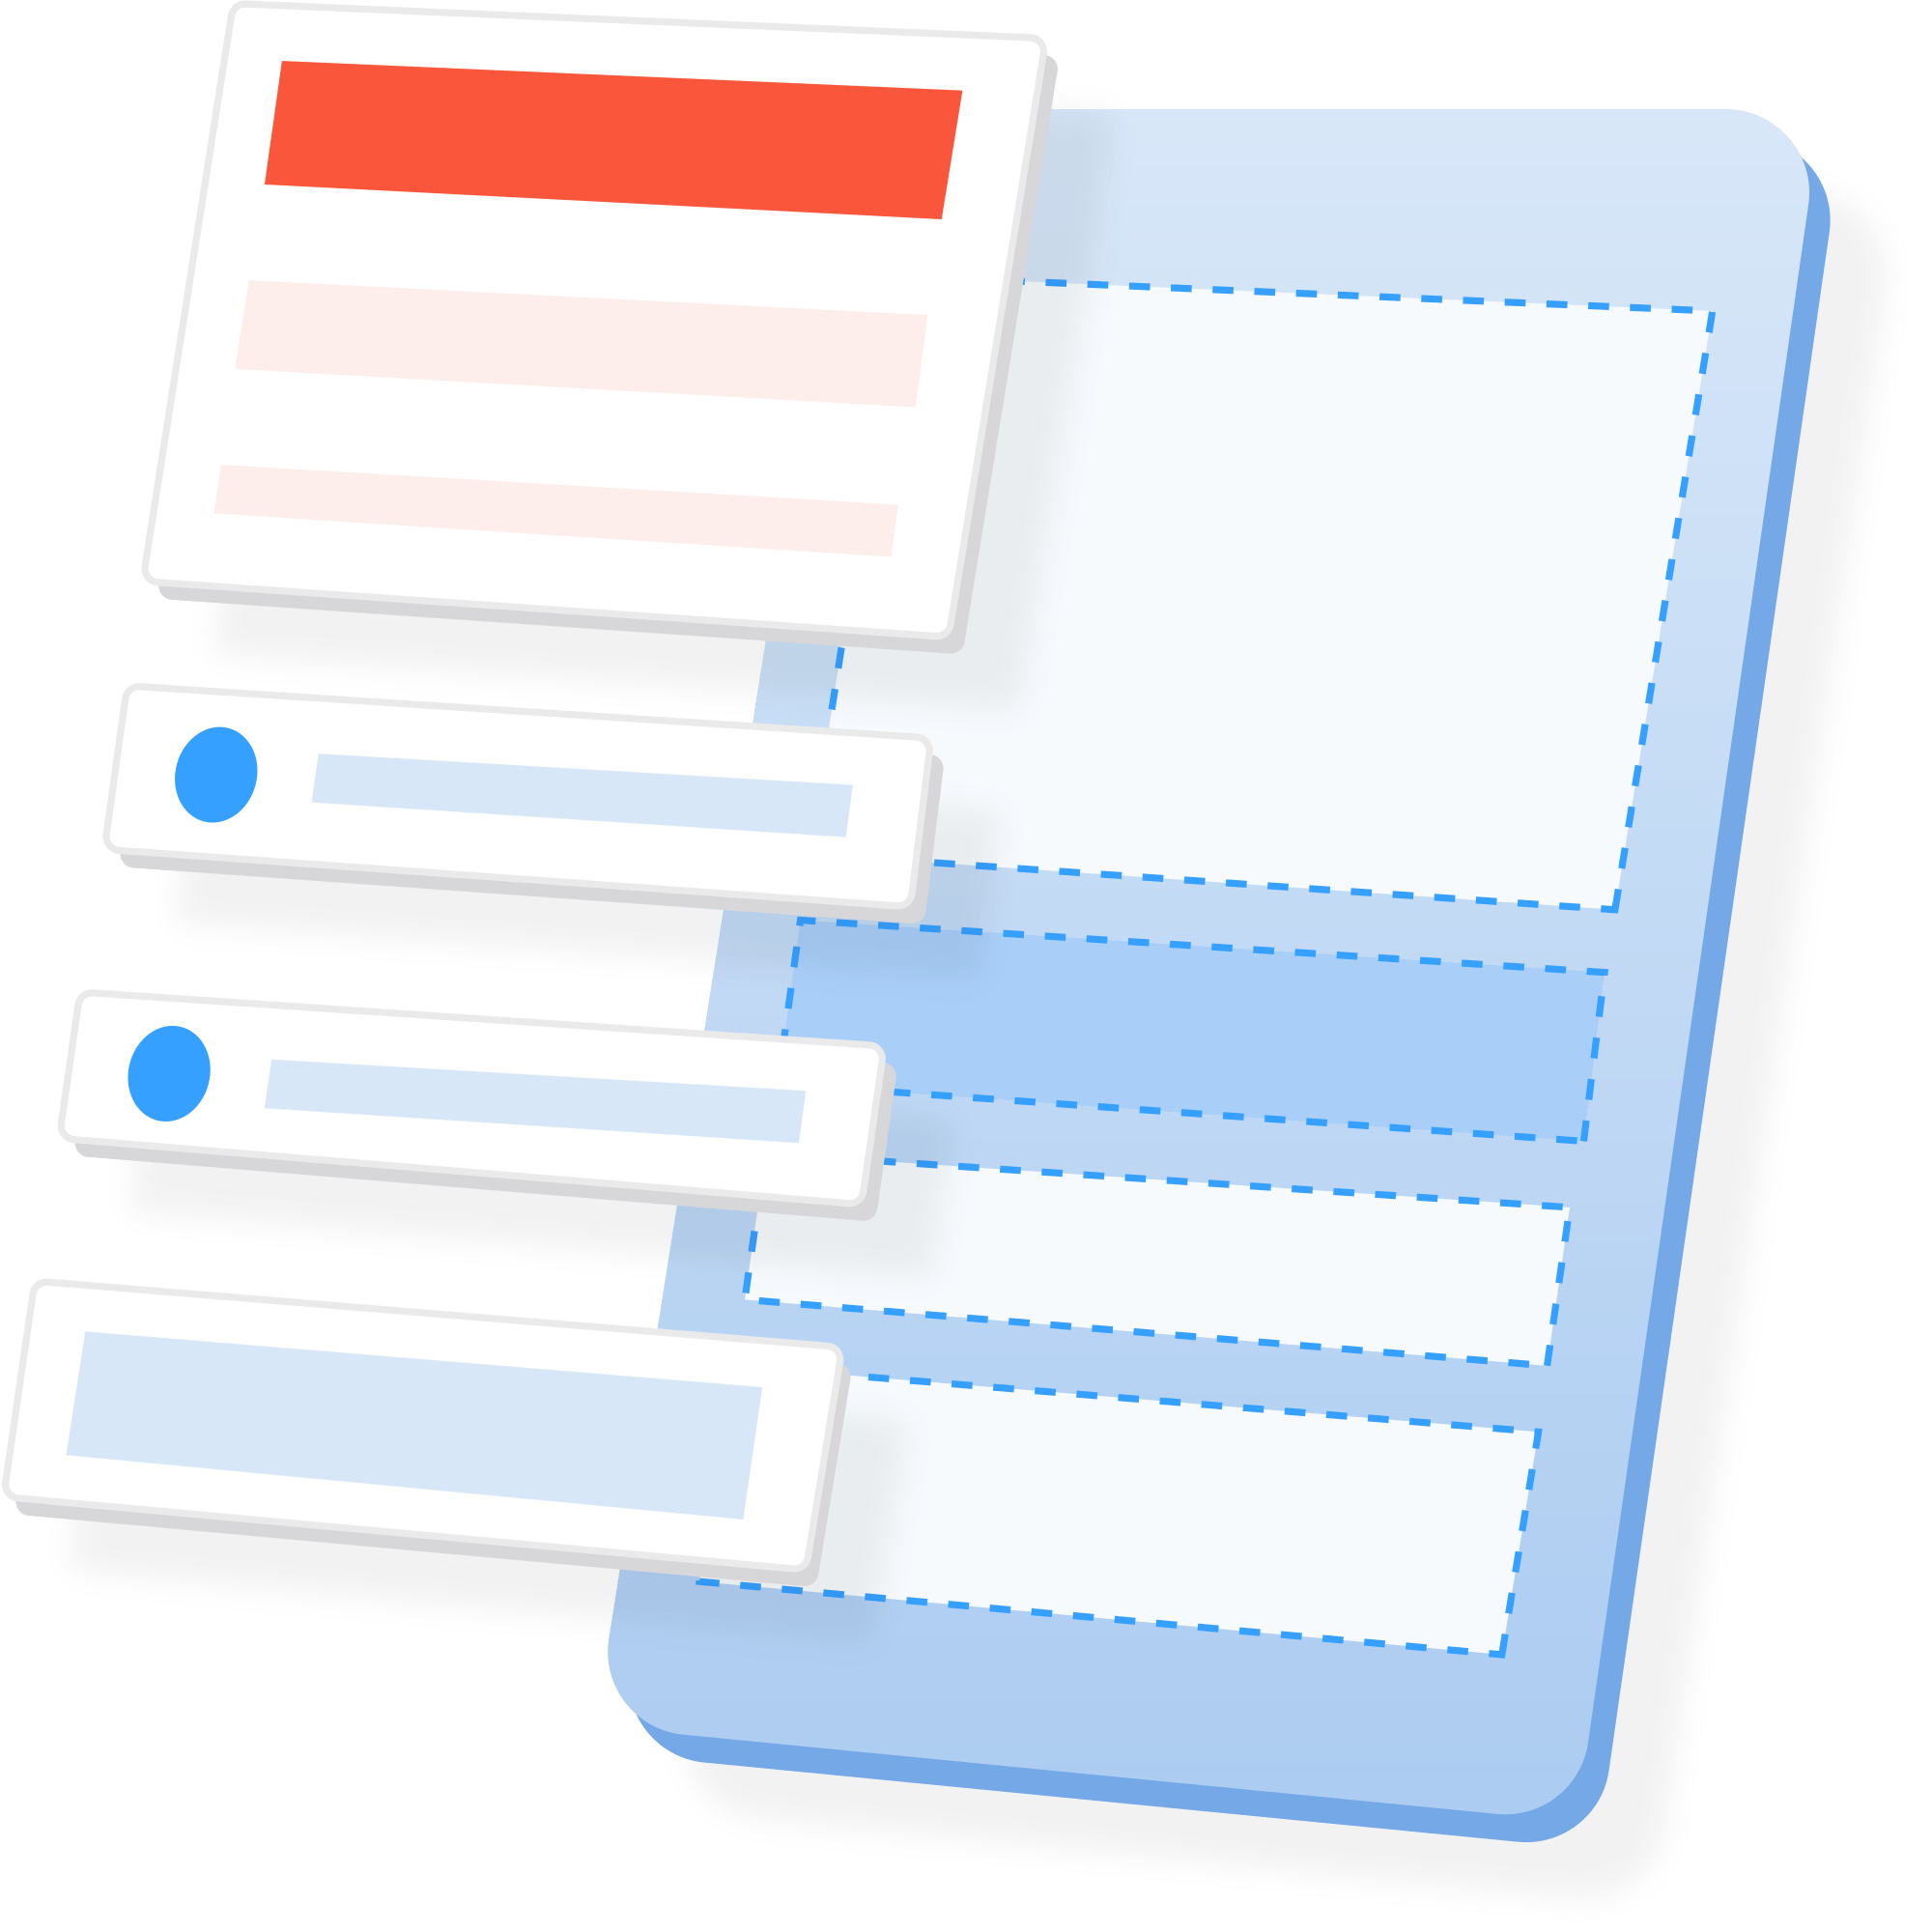 Customise your forms